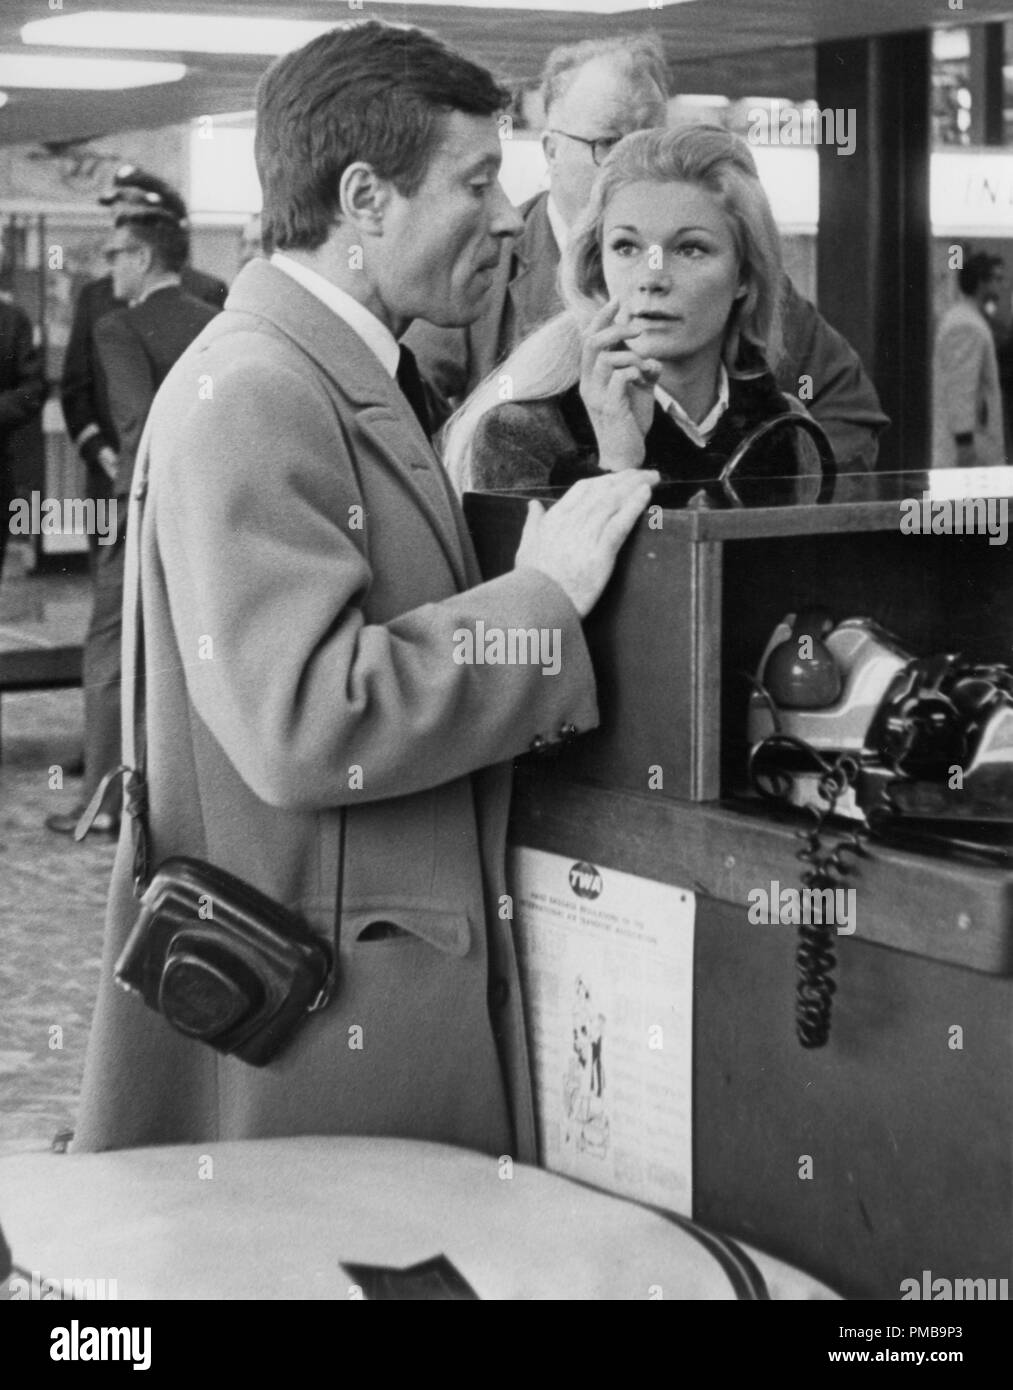 Yvette Mimieux with French film director Serge Bourguignon, 1966  File Reference # 32557 911THA Stock Photo